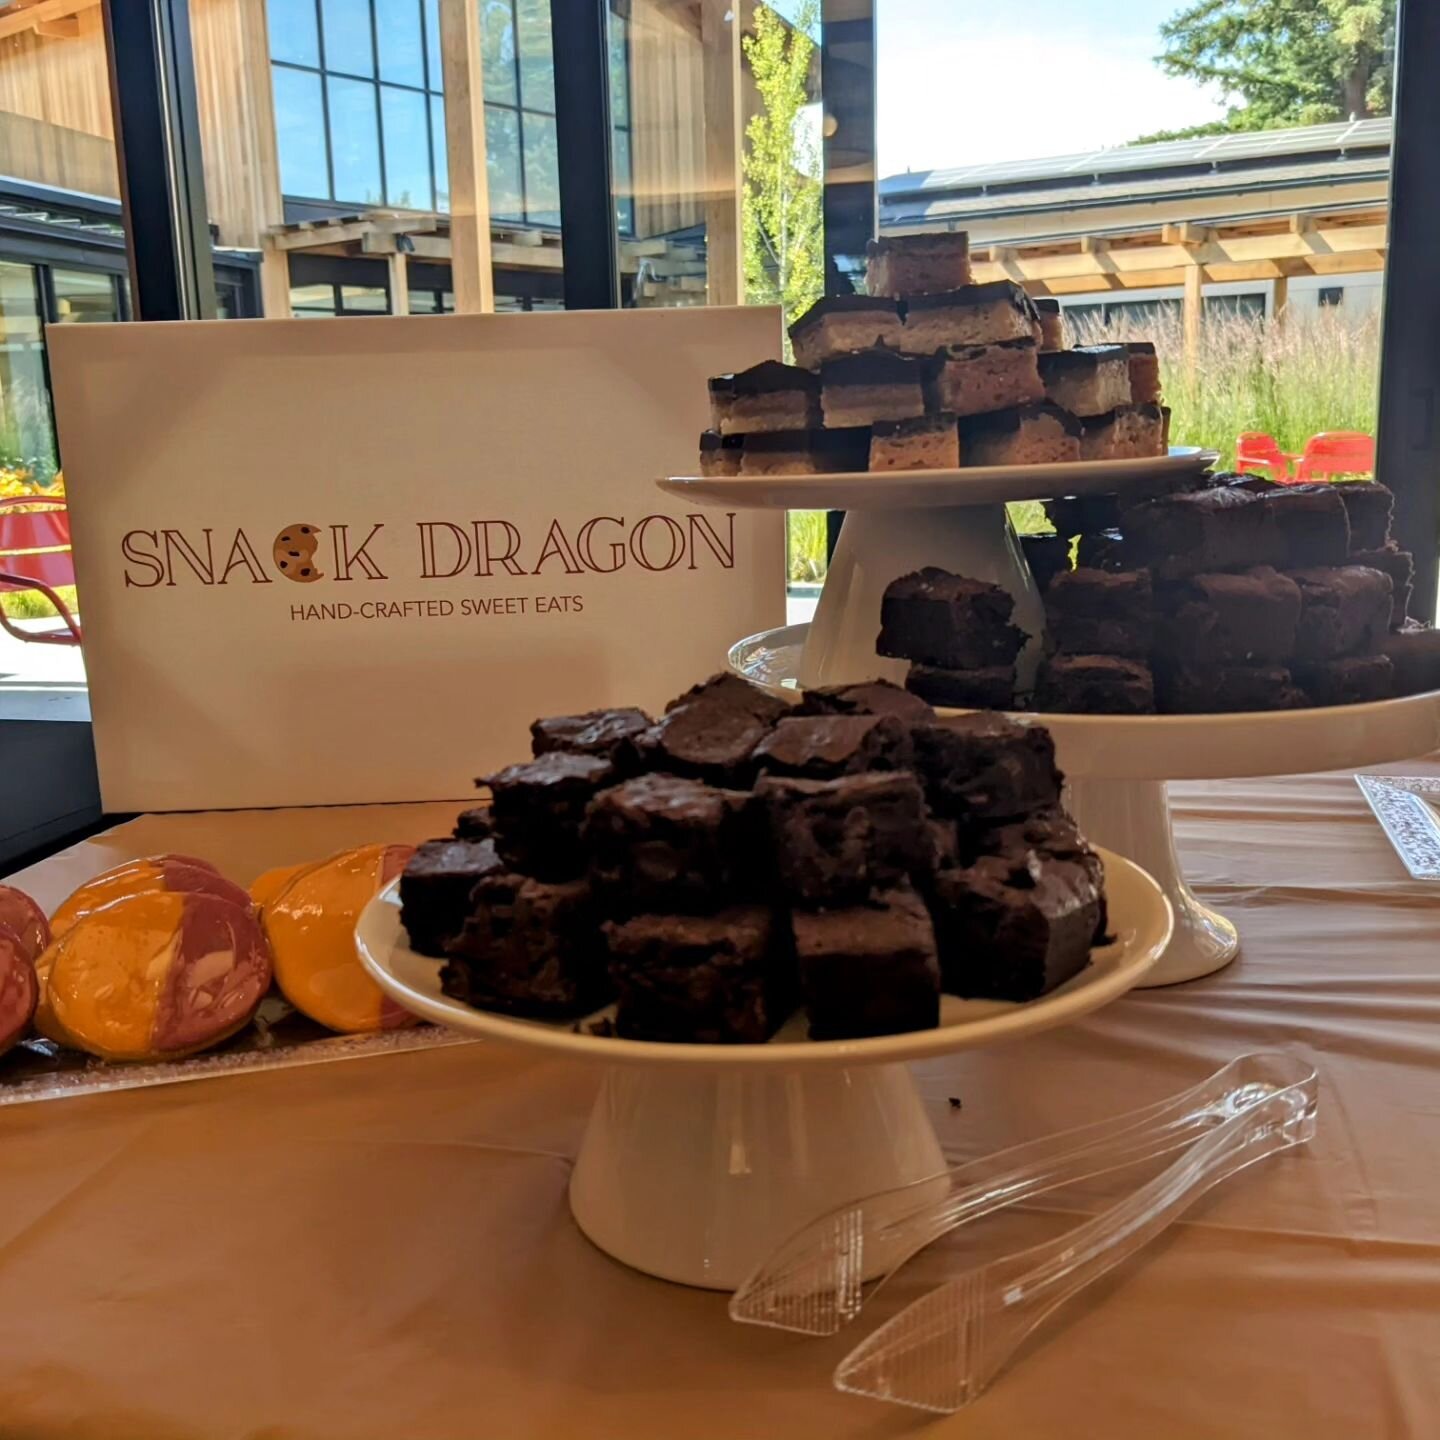 Thank you to CSA of MV, LA, and LAH for inviting Snack Dragon to their Volunteer Appreciation Event!

With 40 staff and 500 volunteers per year, CSA is providing critical support services in our local communities.  I am a weekly volunteer for their f